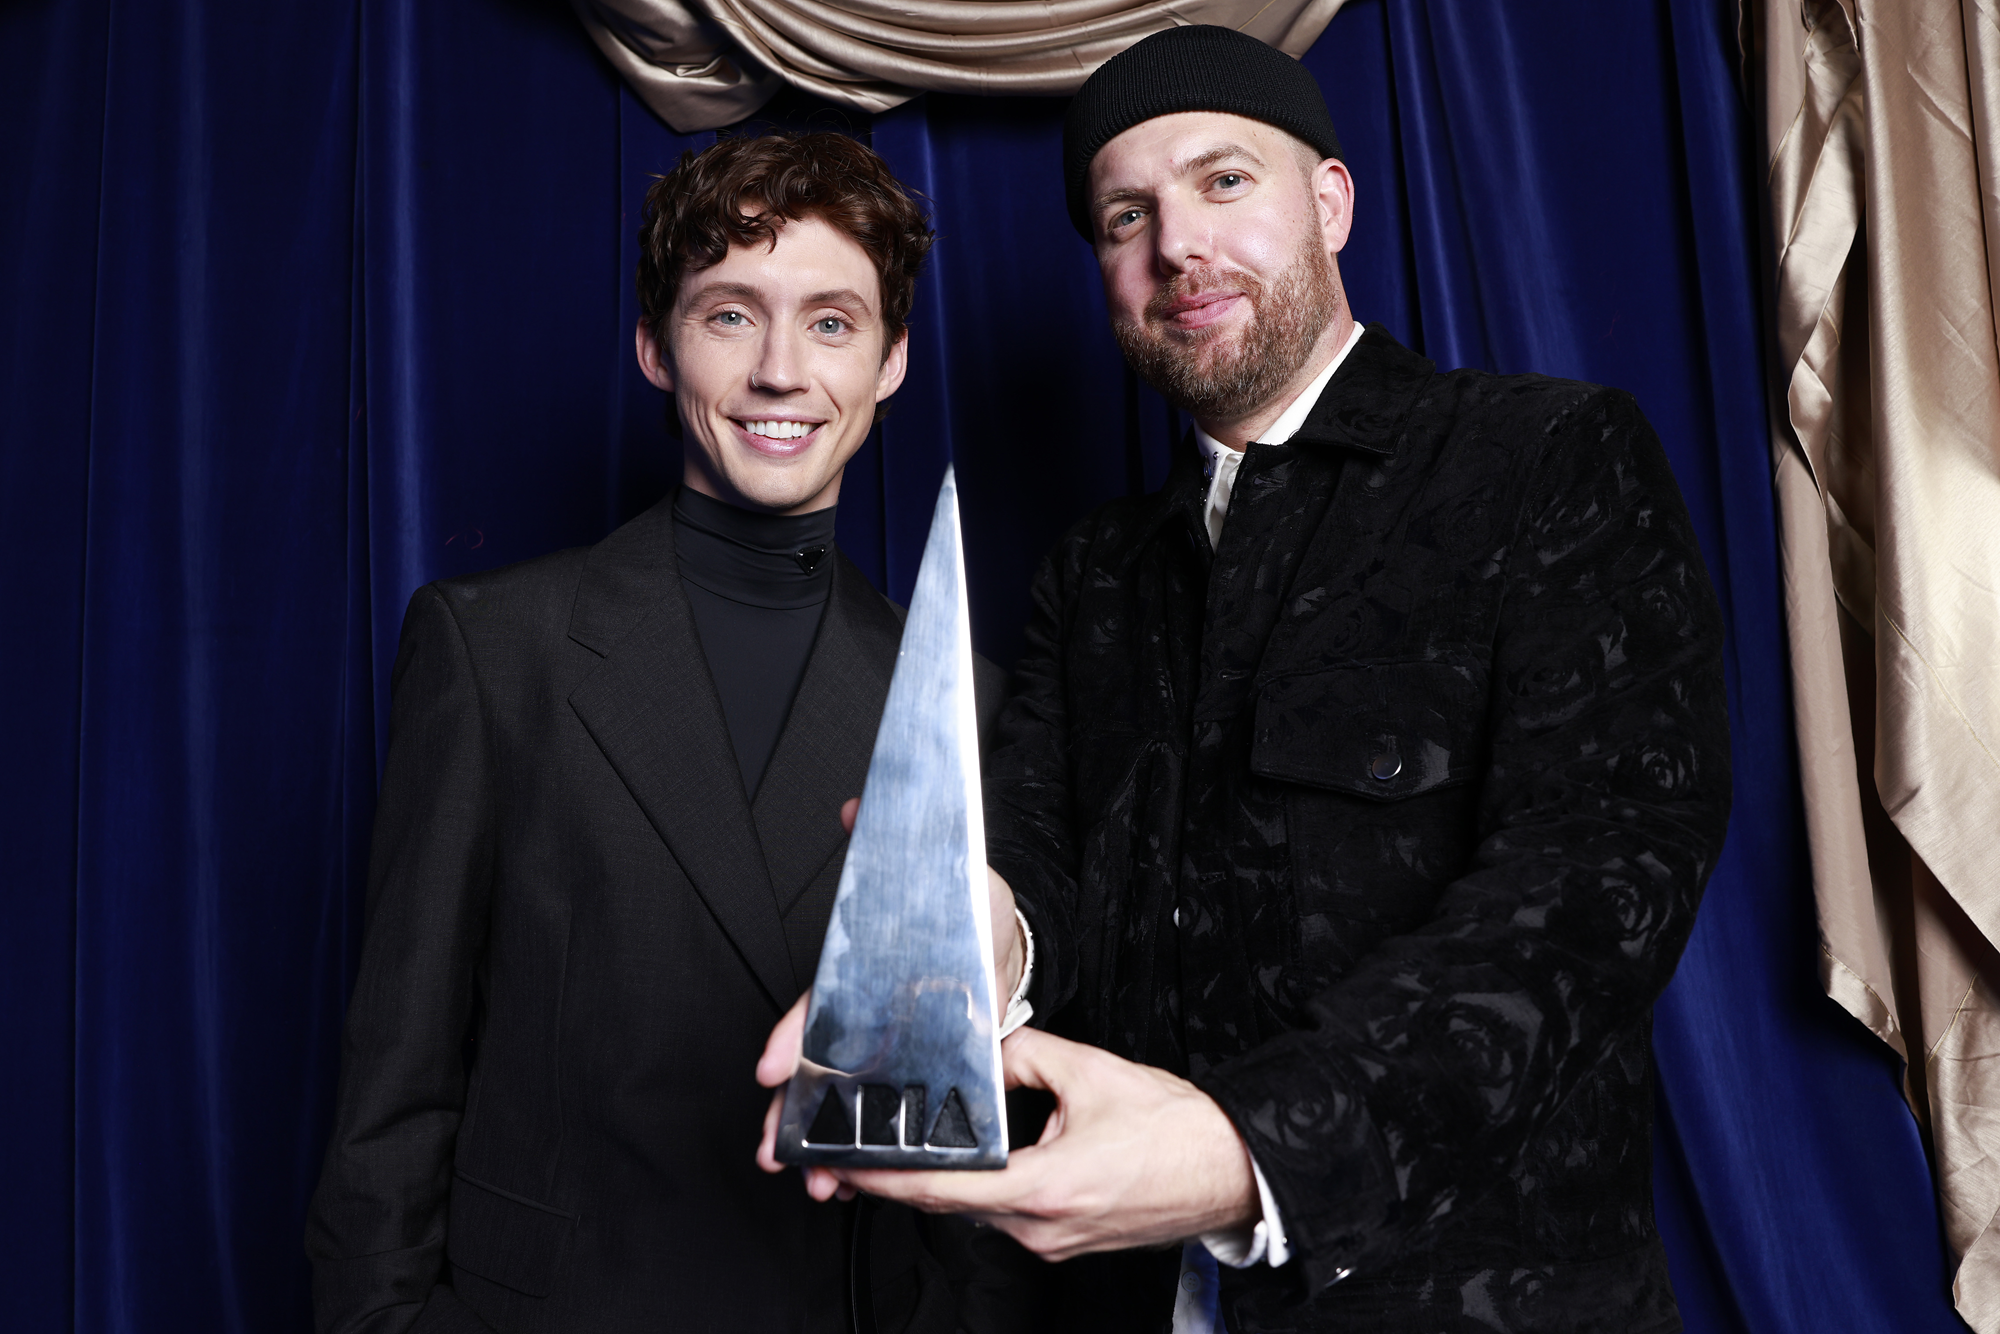 Styalz Fuego (R) poses with Troye Sivan holding an Aria